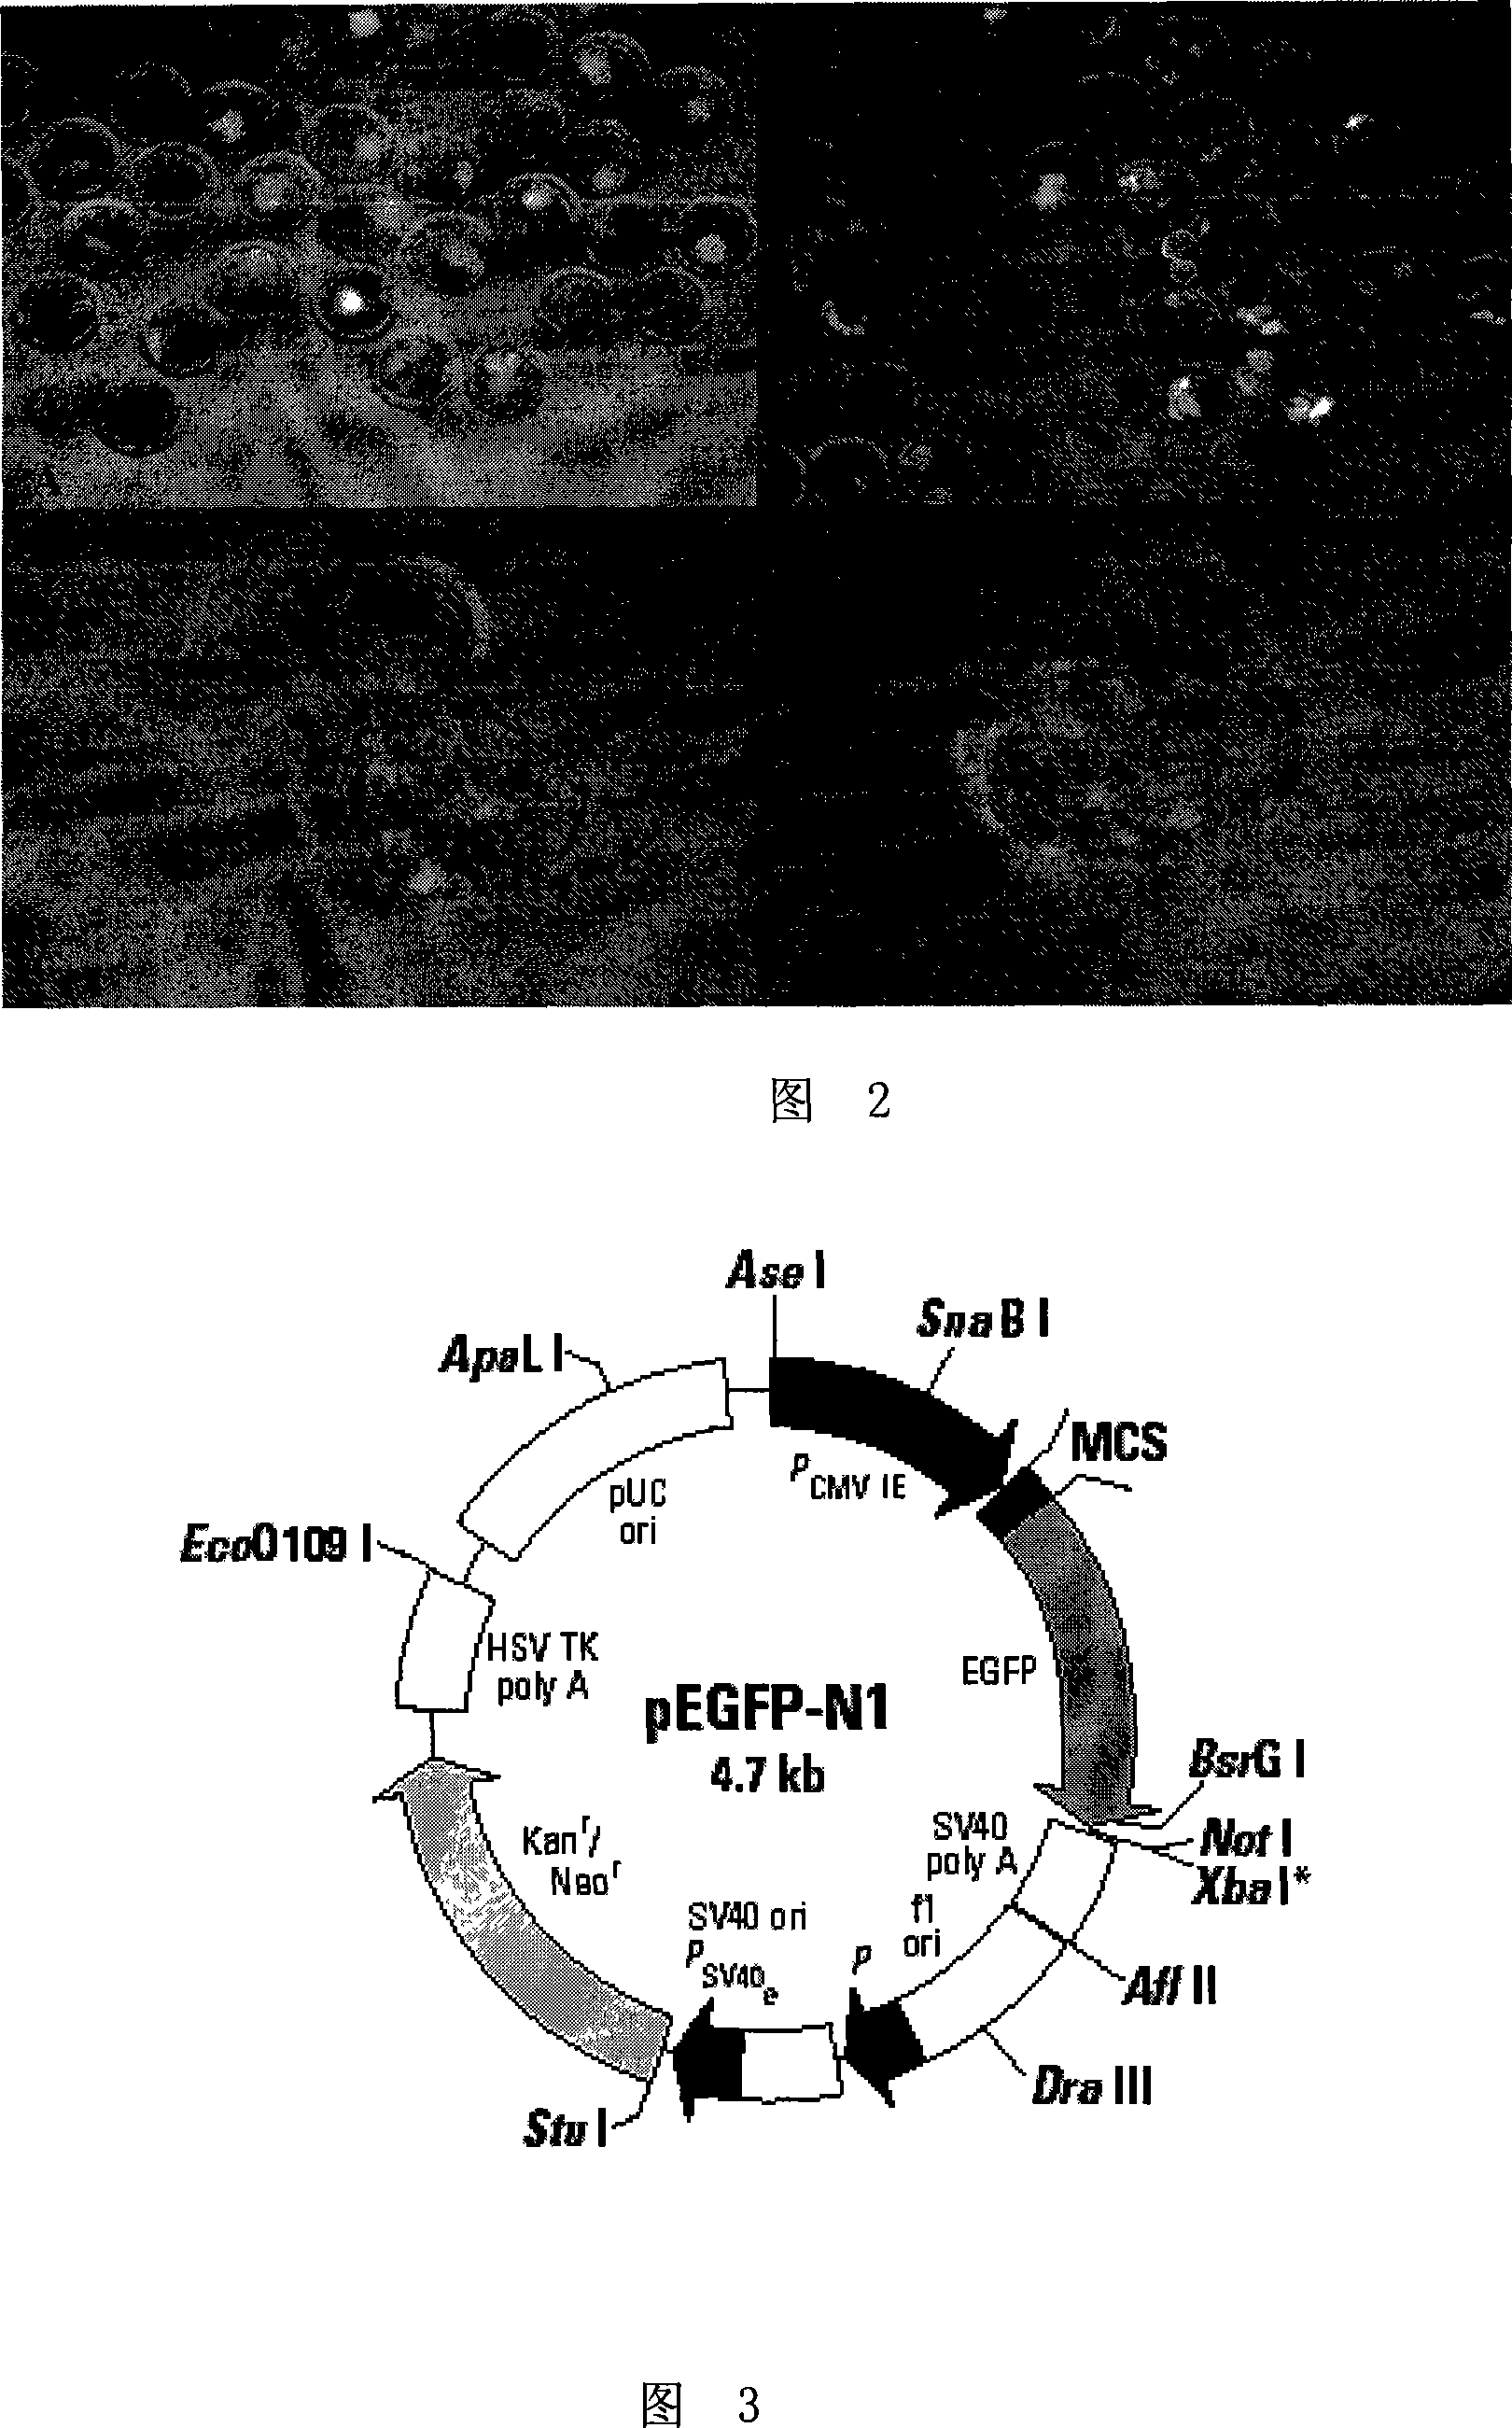 Method for cloning animal somatic cell